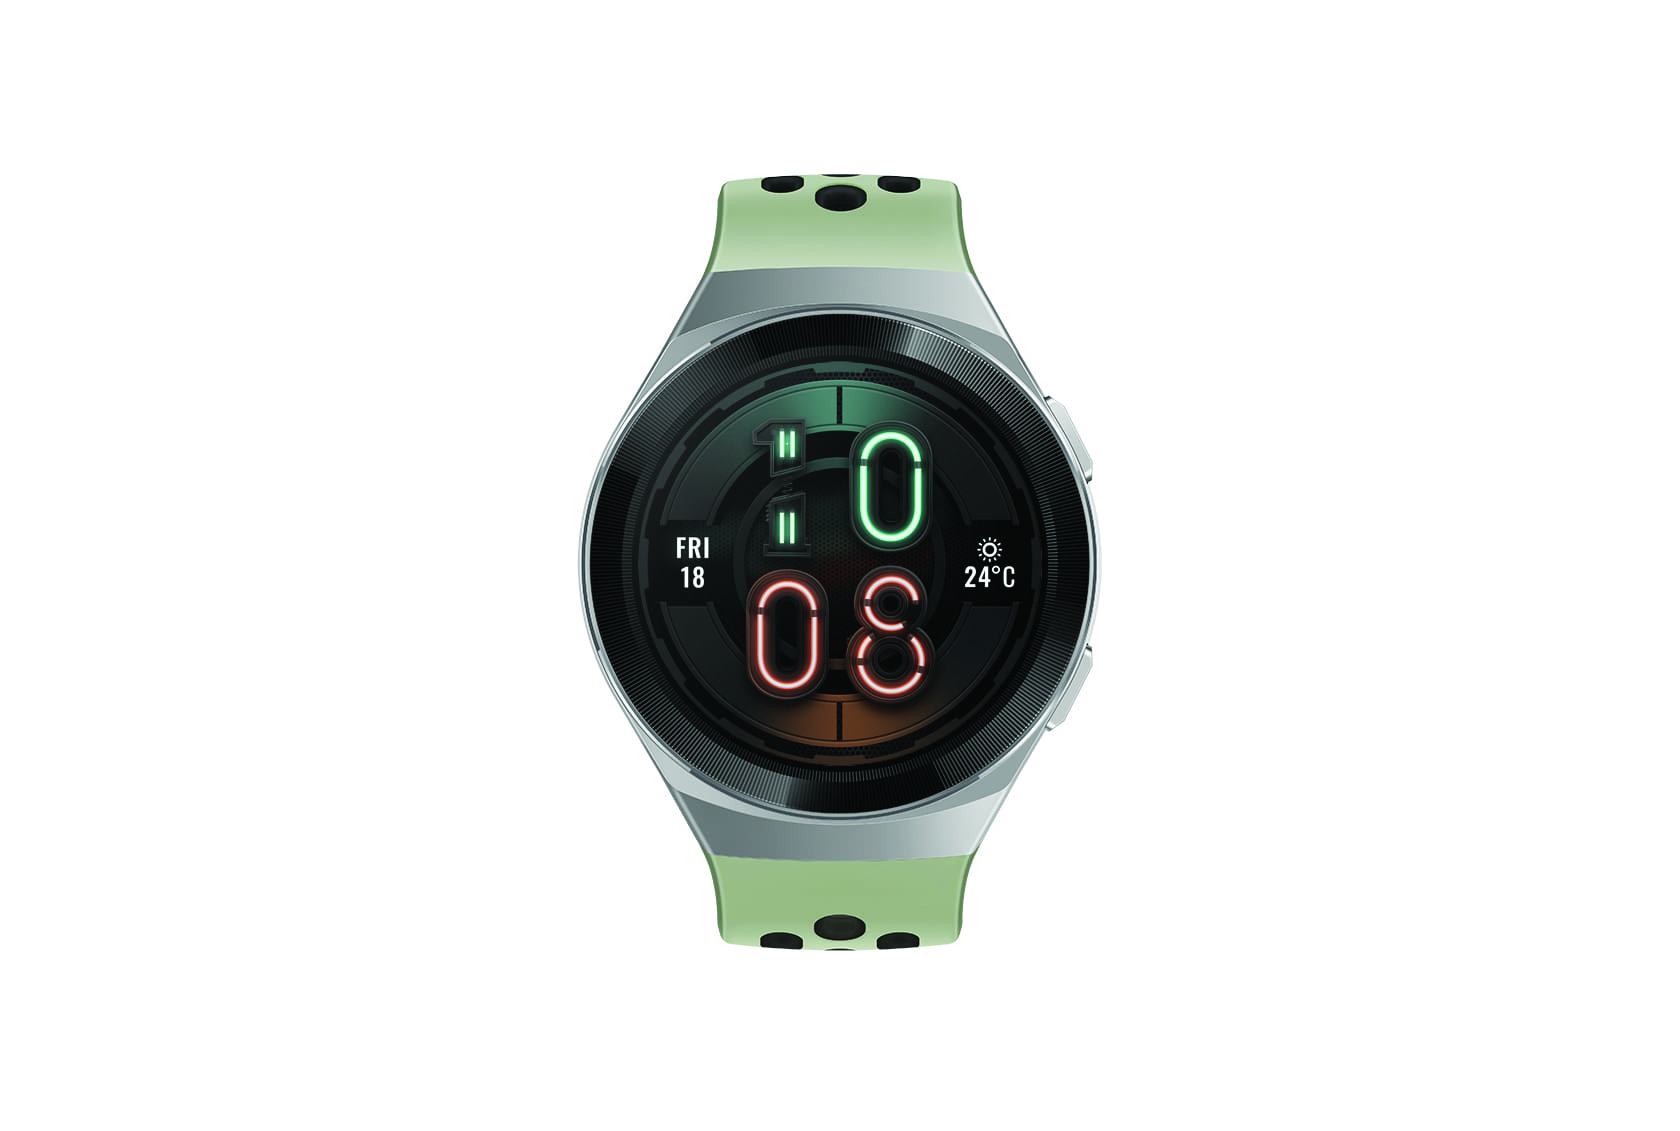 Huawei’s Watch GT 2e Now Available in South Africa